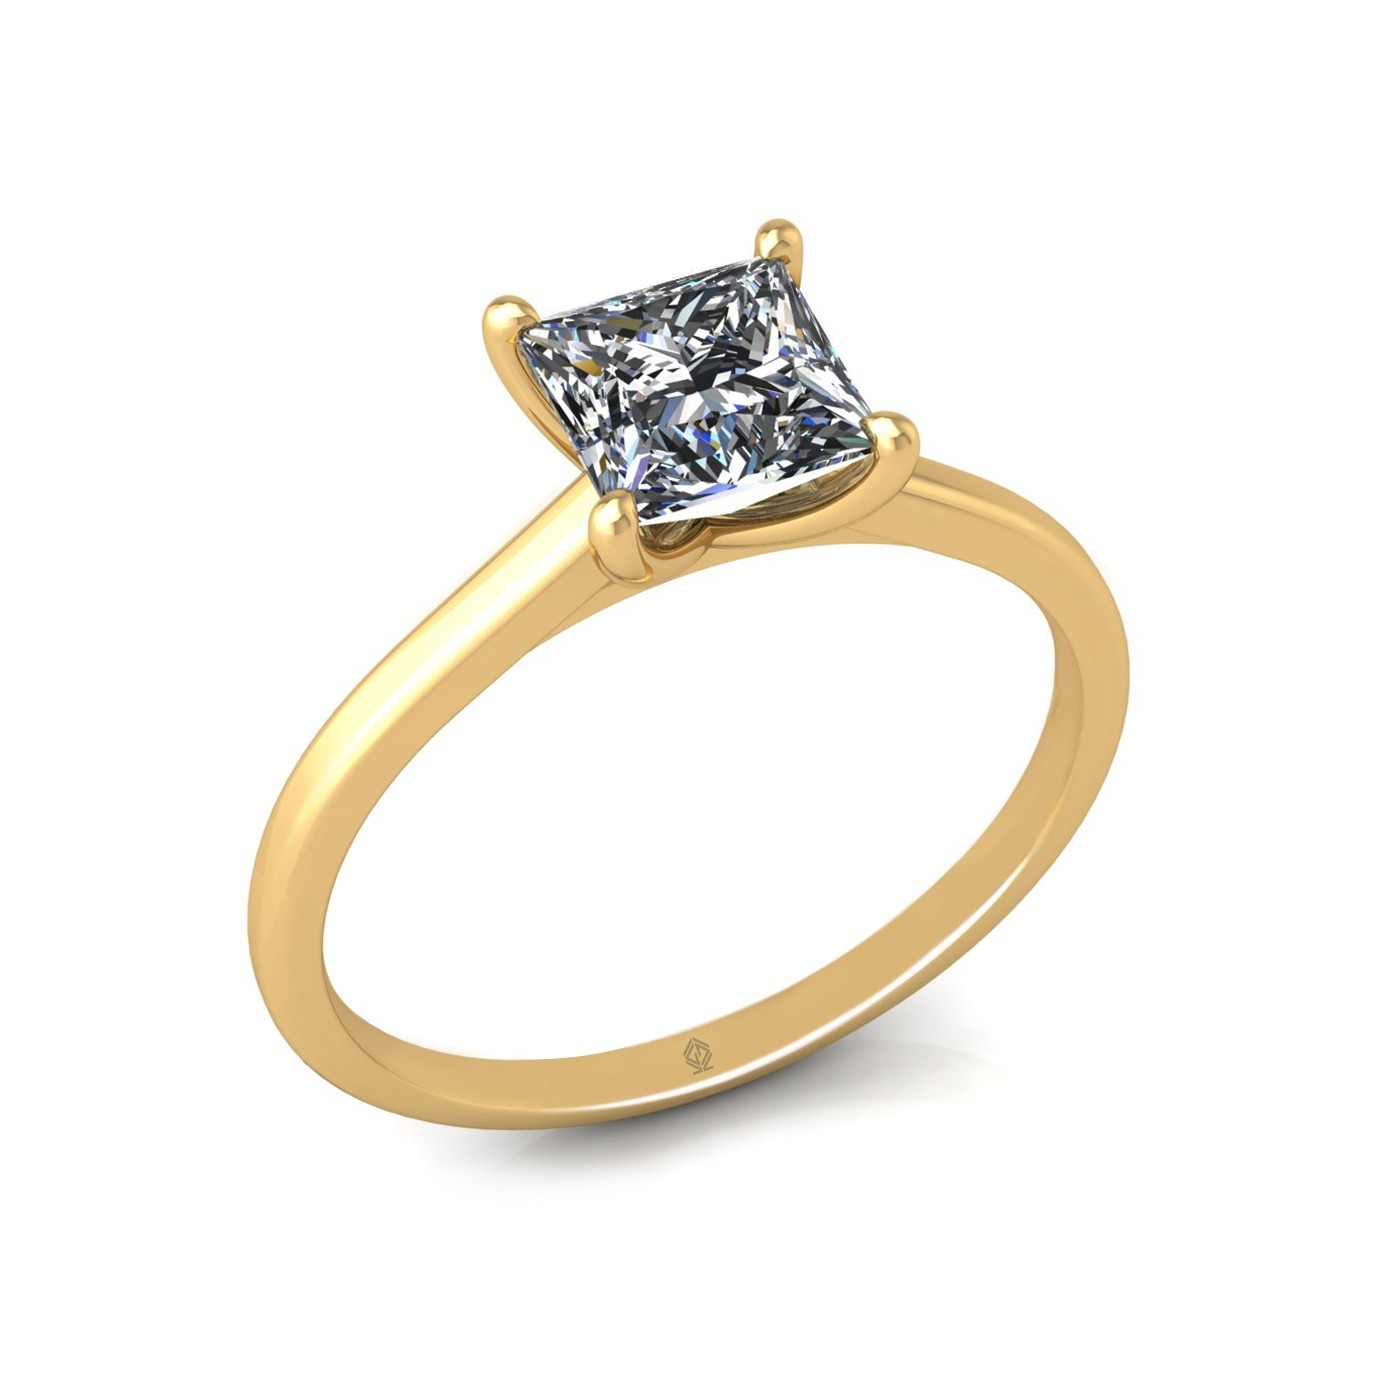 18K YELLOW GOLD 4 PRONGS SOLITAIRE PRINCESS CUT DIAMOND ENGAGEMENT RING WITH WHISPER THIN BAND